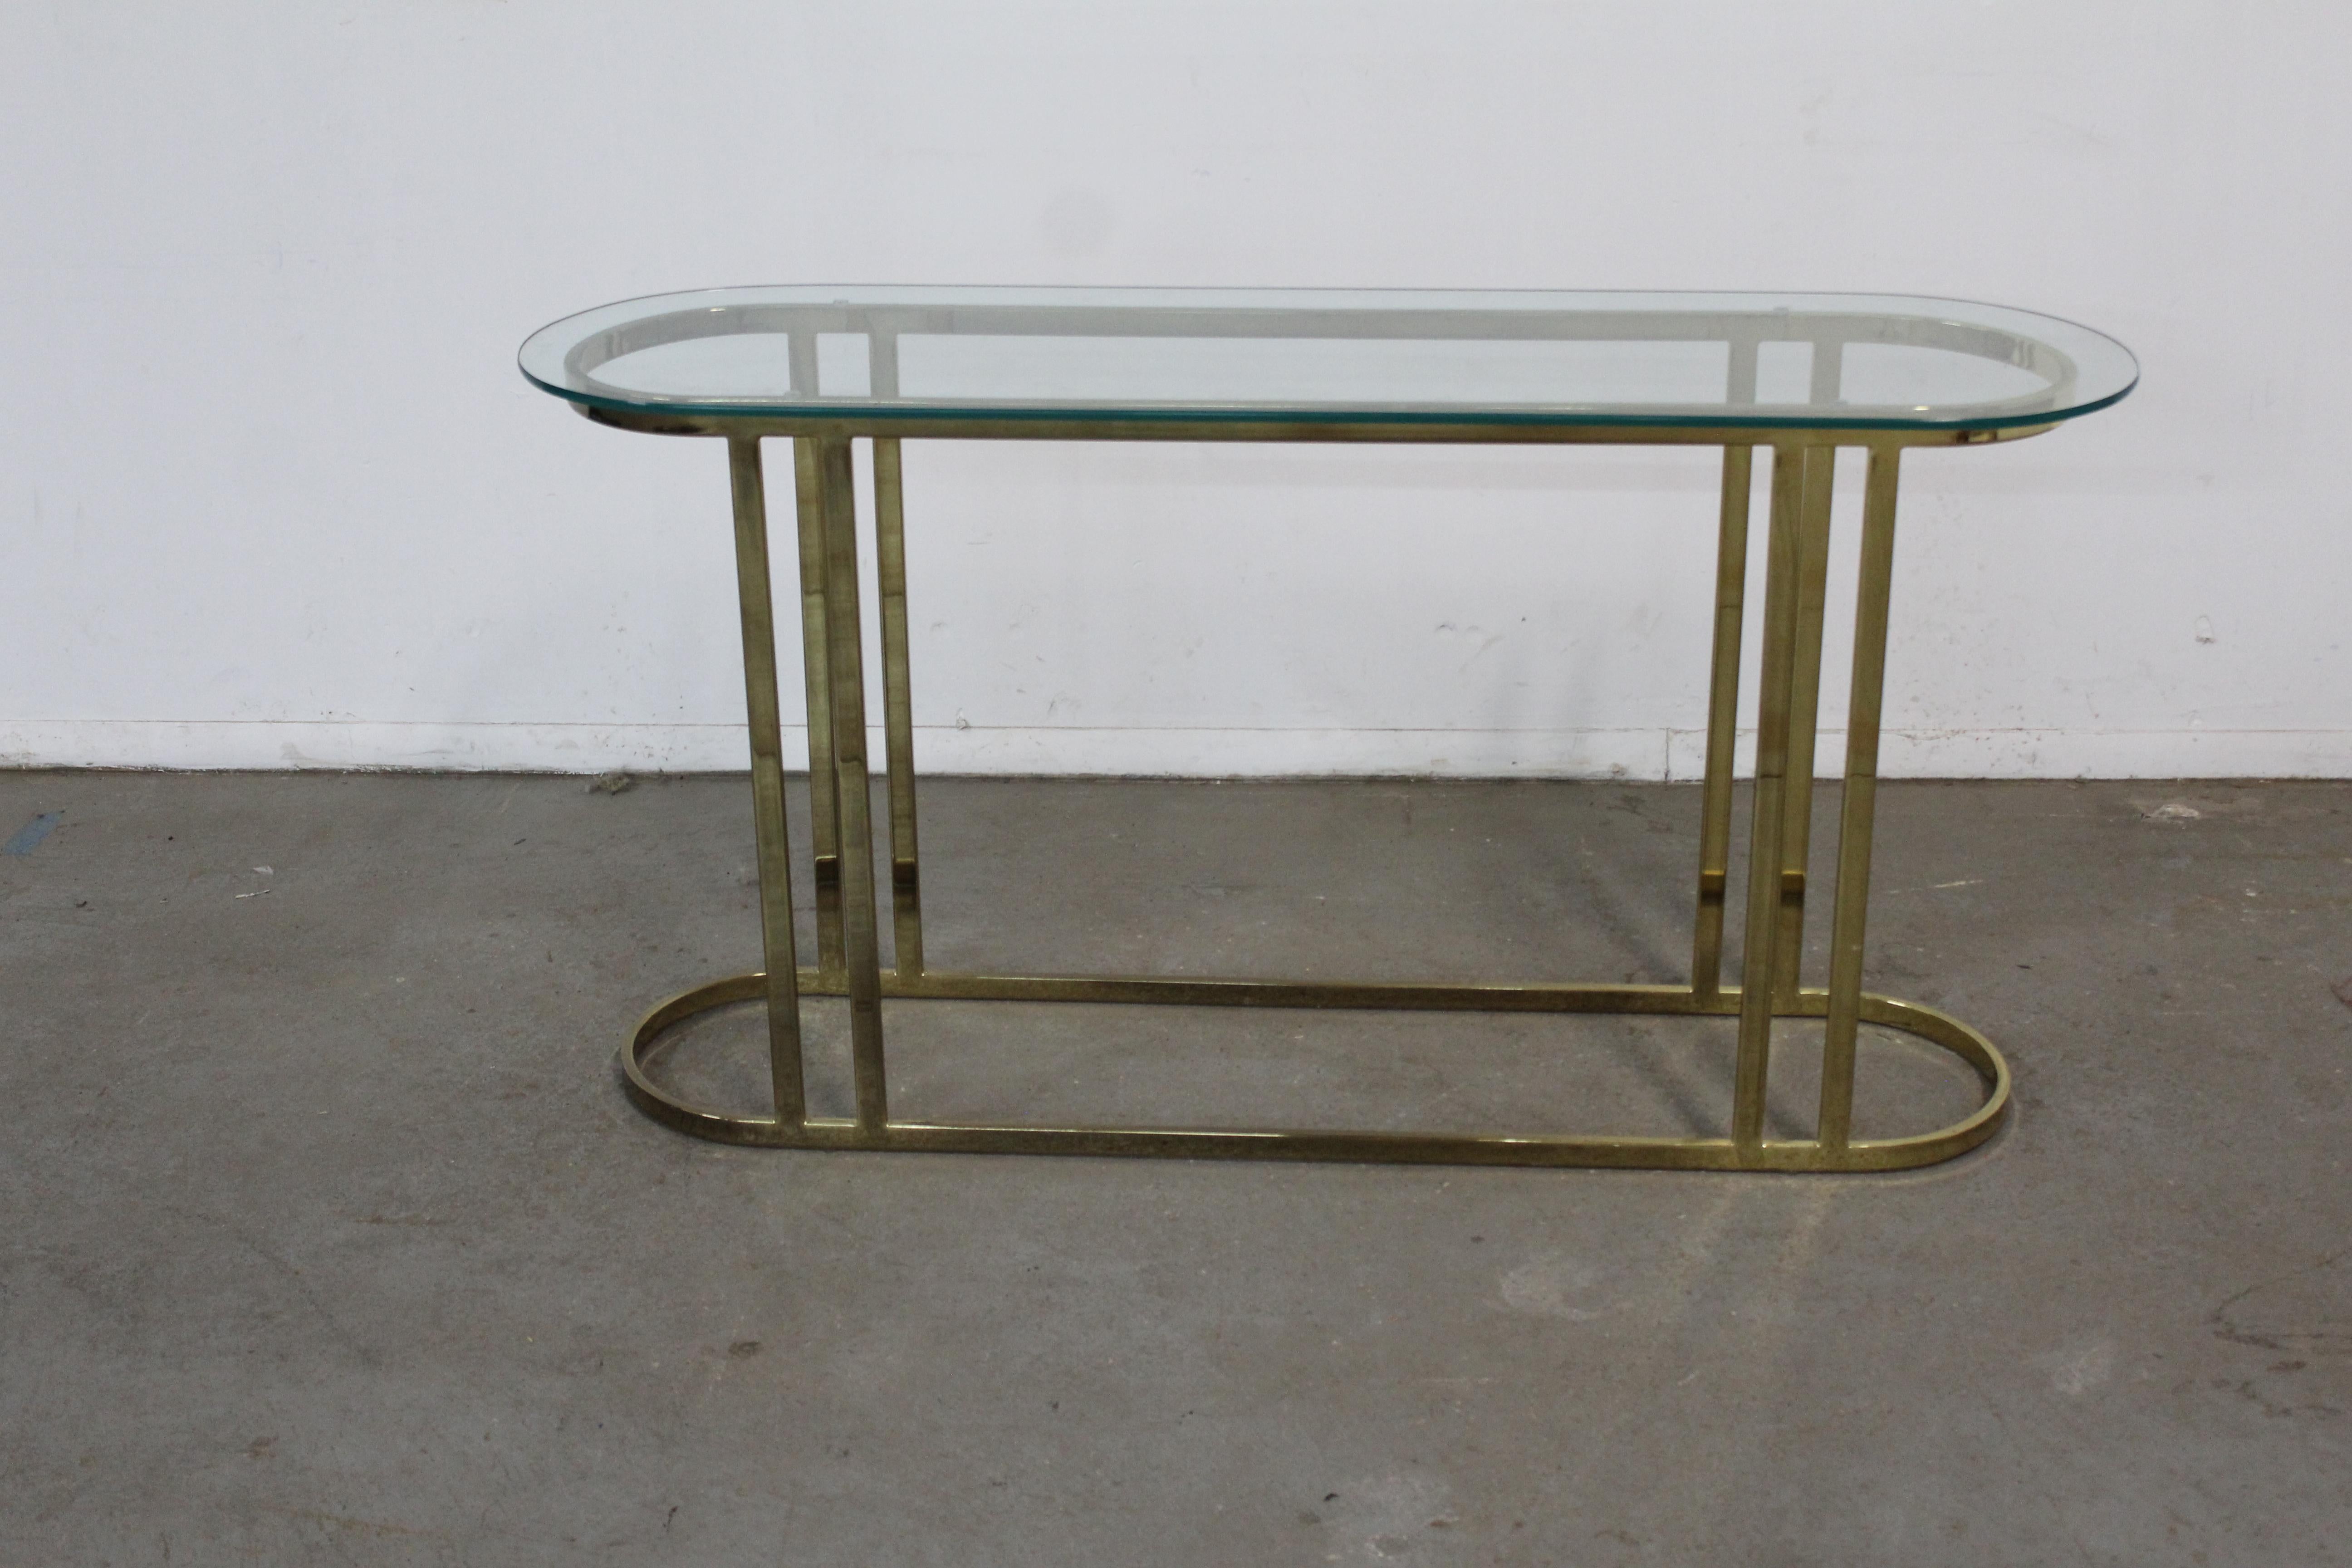 Mid Century Hollywood Regency Eliptical Brass Sofa/Hall/Console Table
 Offered is a piece of time and design a Mid Century Hollywood Regency Eliptical Brass Sofa/Hall/Console Table. The table has a nice shape. The table has a  glass top and is